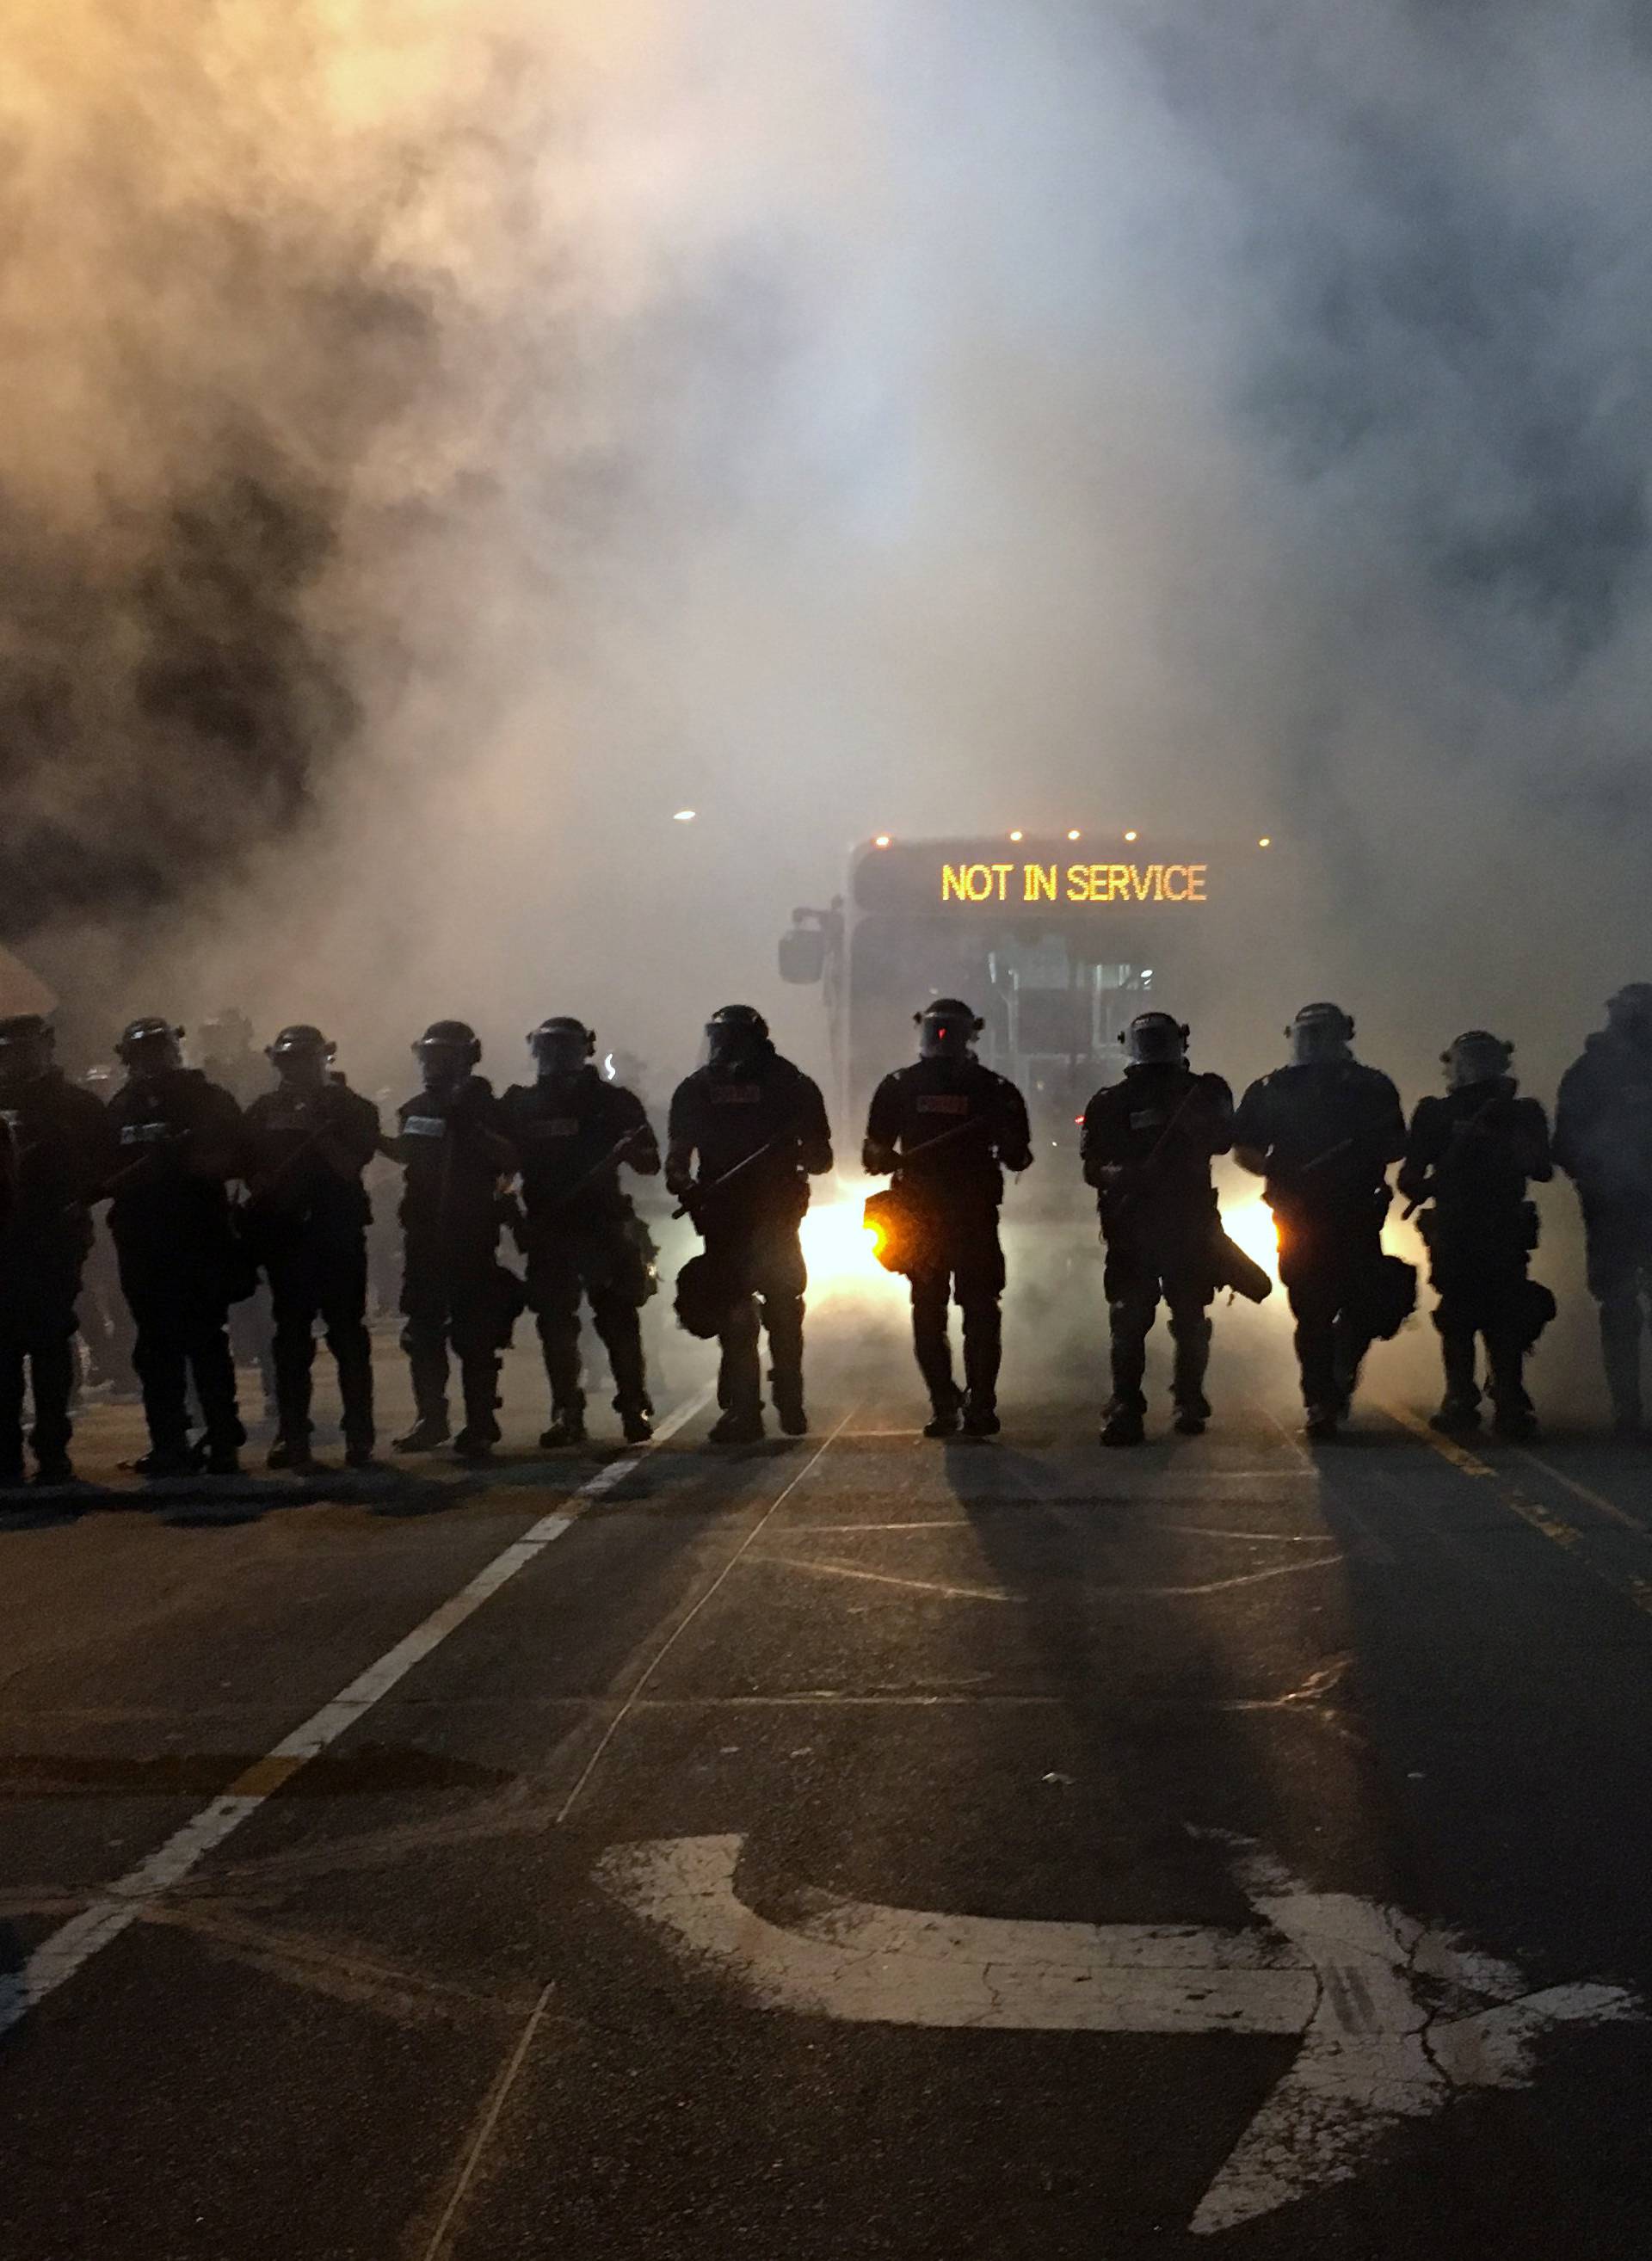 Police officers wearing riot gear block a road during protests  after police fatally shot a man in the parking lot of an apartment complex in Charlotte